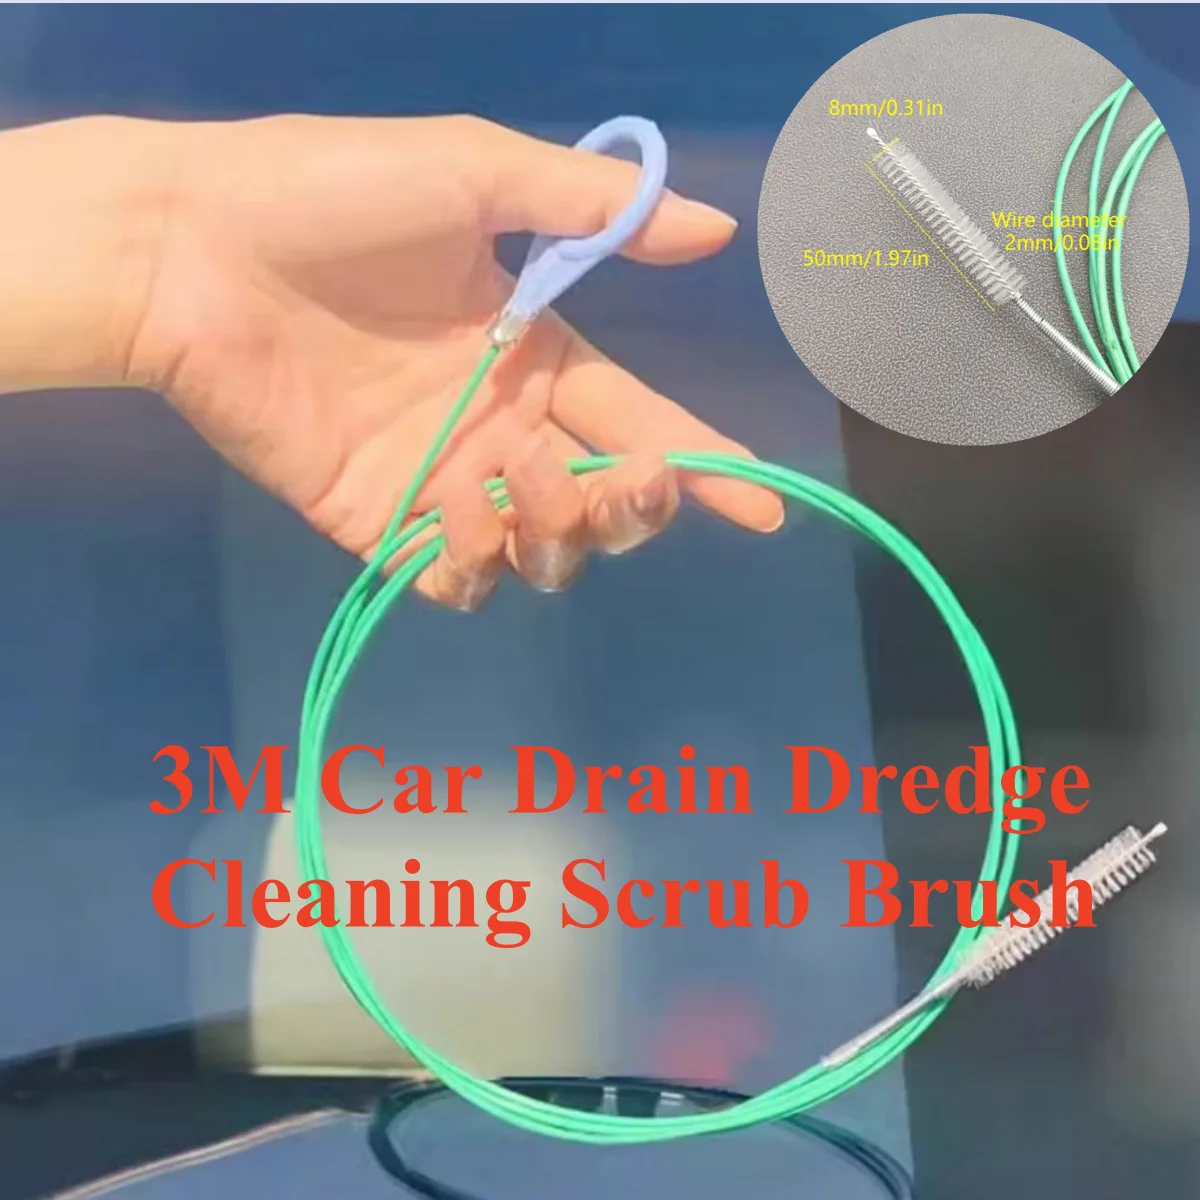 

3m Car Drain Dredge Cleaning Scrub Brush Auto Sunroof Long Hoses Detailing Tool Spiral Cleaner Cleaning Brush Drain Cleaner